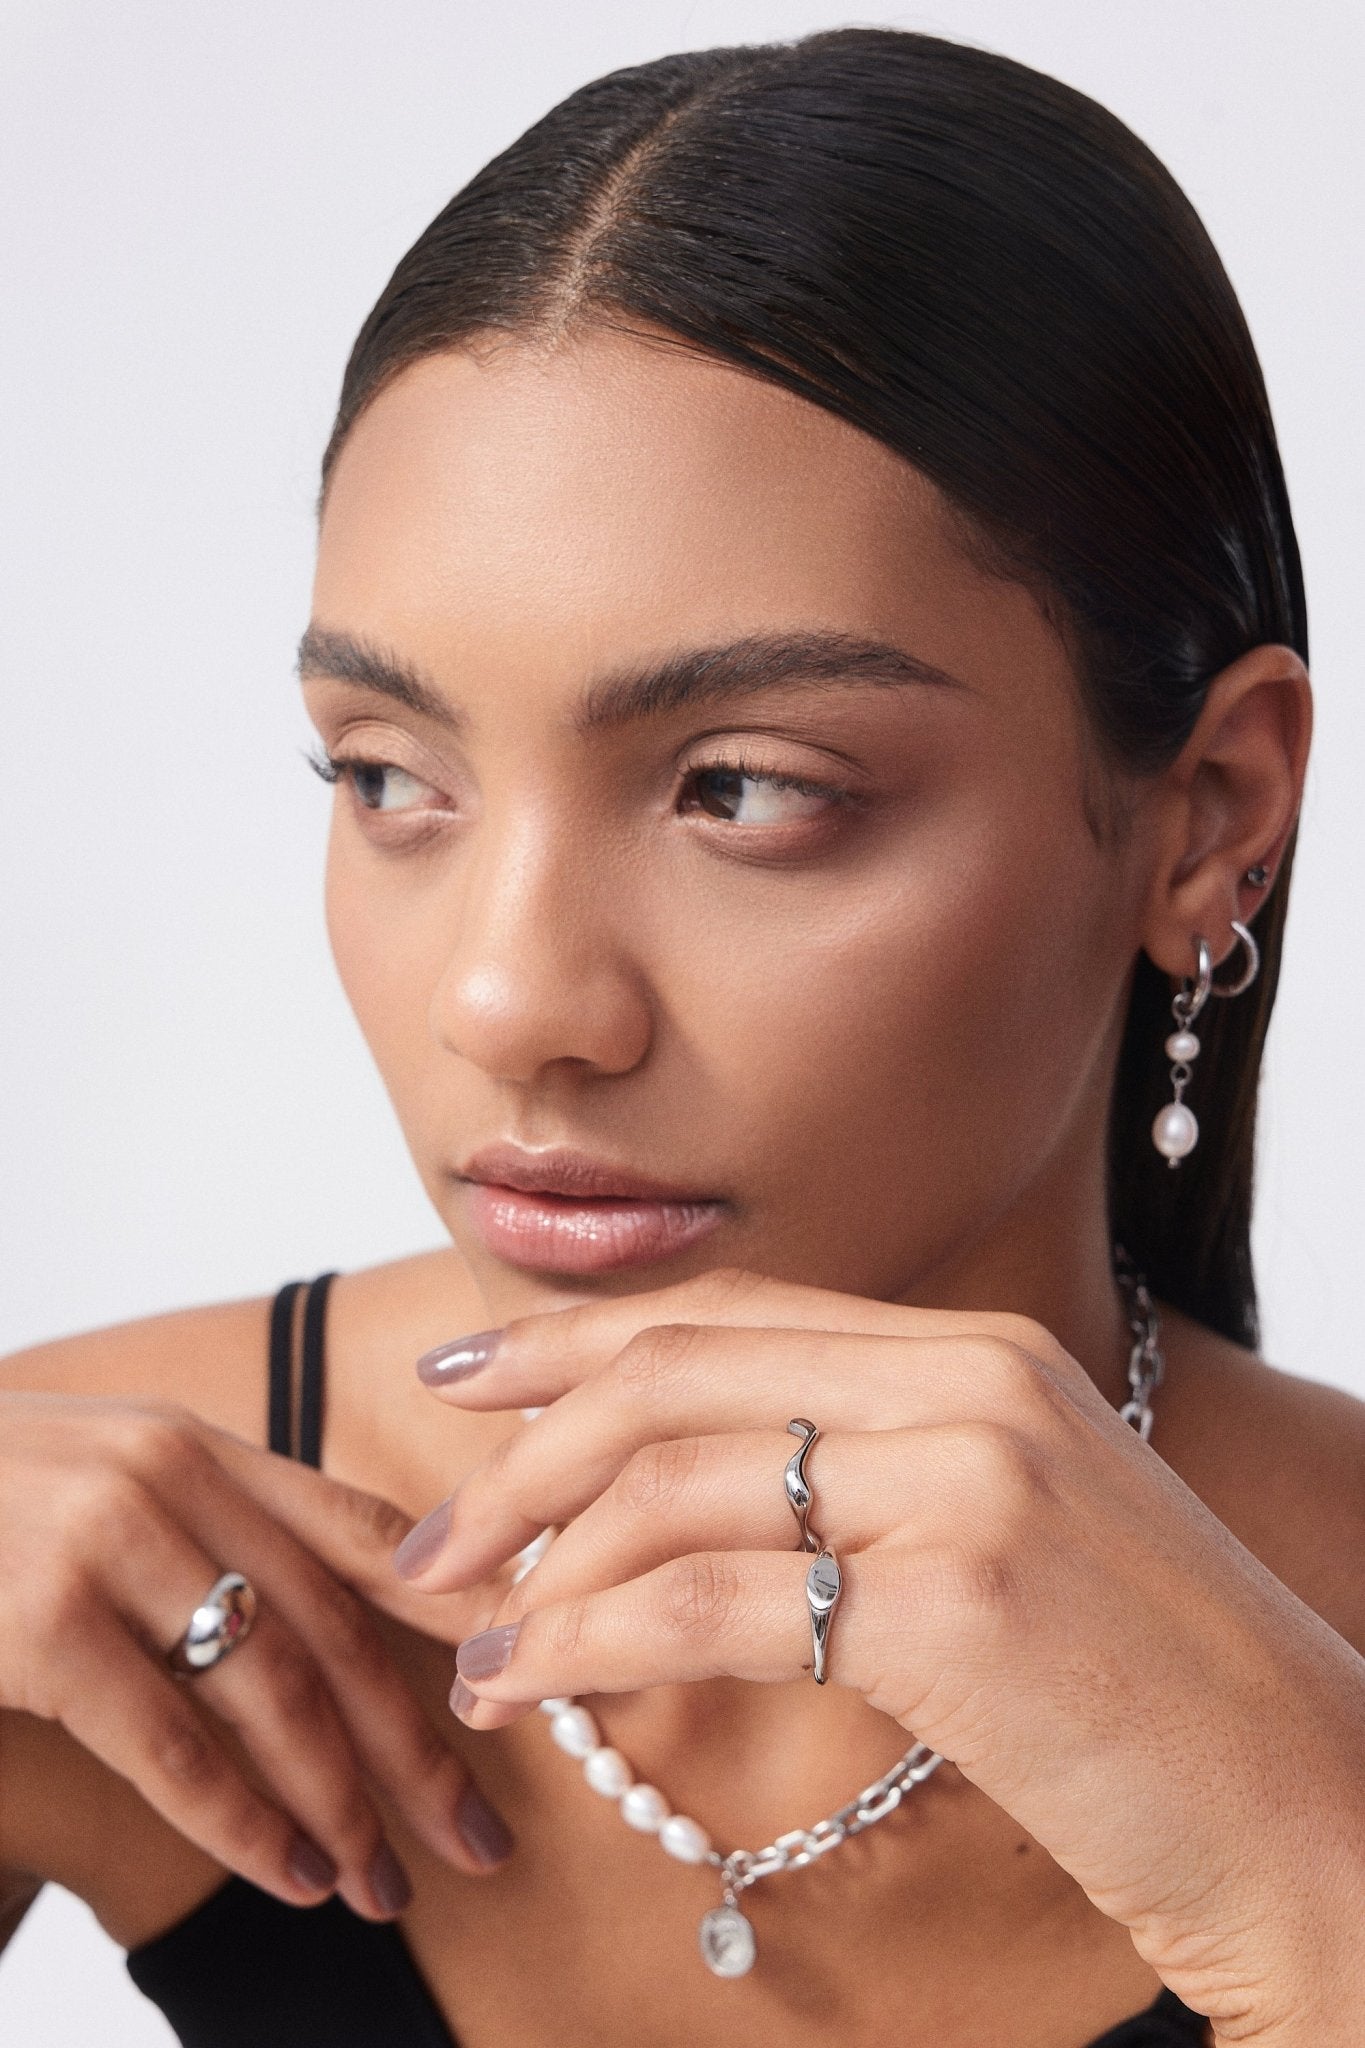 Kylie Ring in Silver - Flaire & Co.